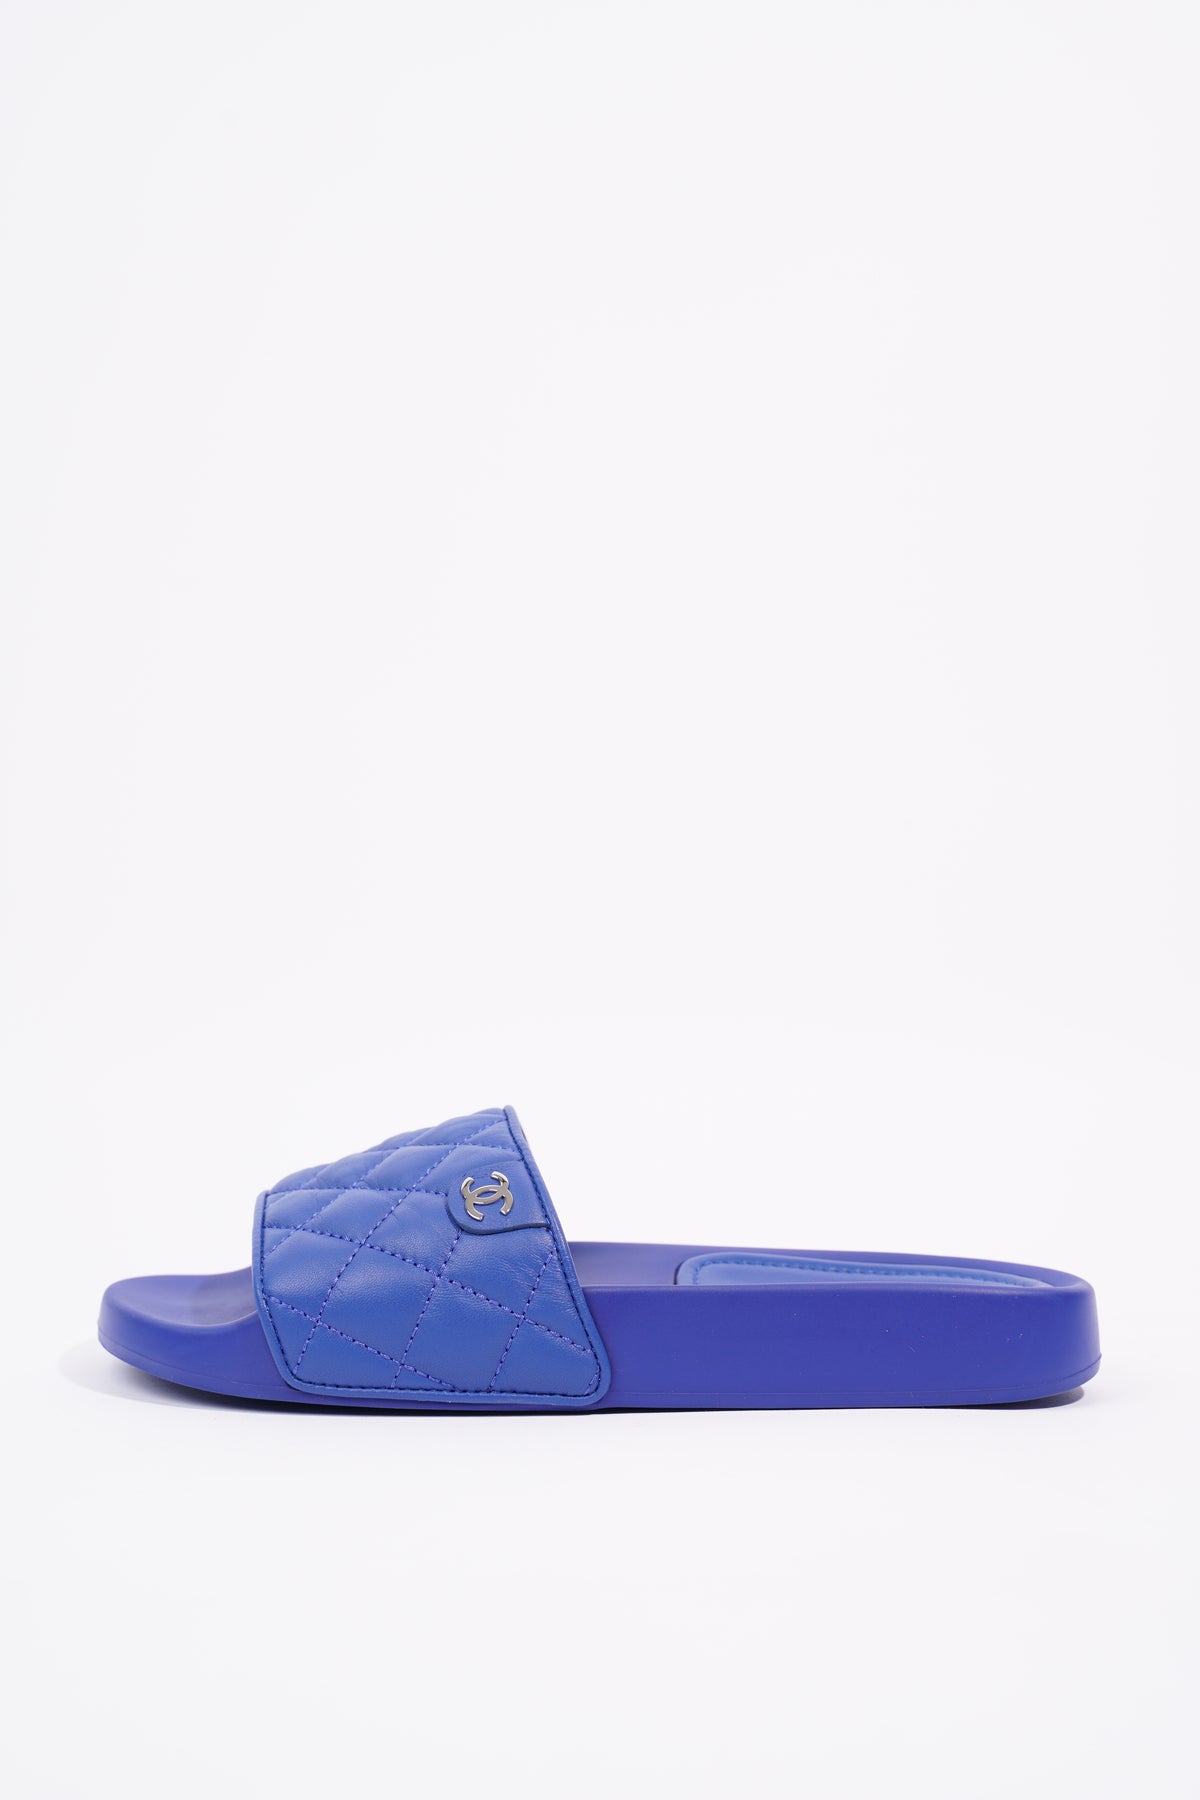 Chanel Womens Quilted Leather CC Slide Blue EU 35 / UK 2 – Luxe Collective